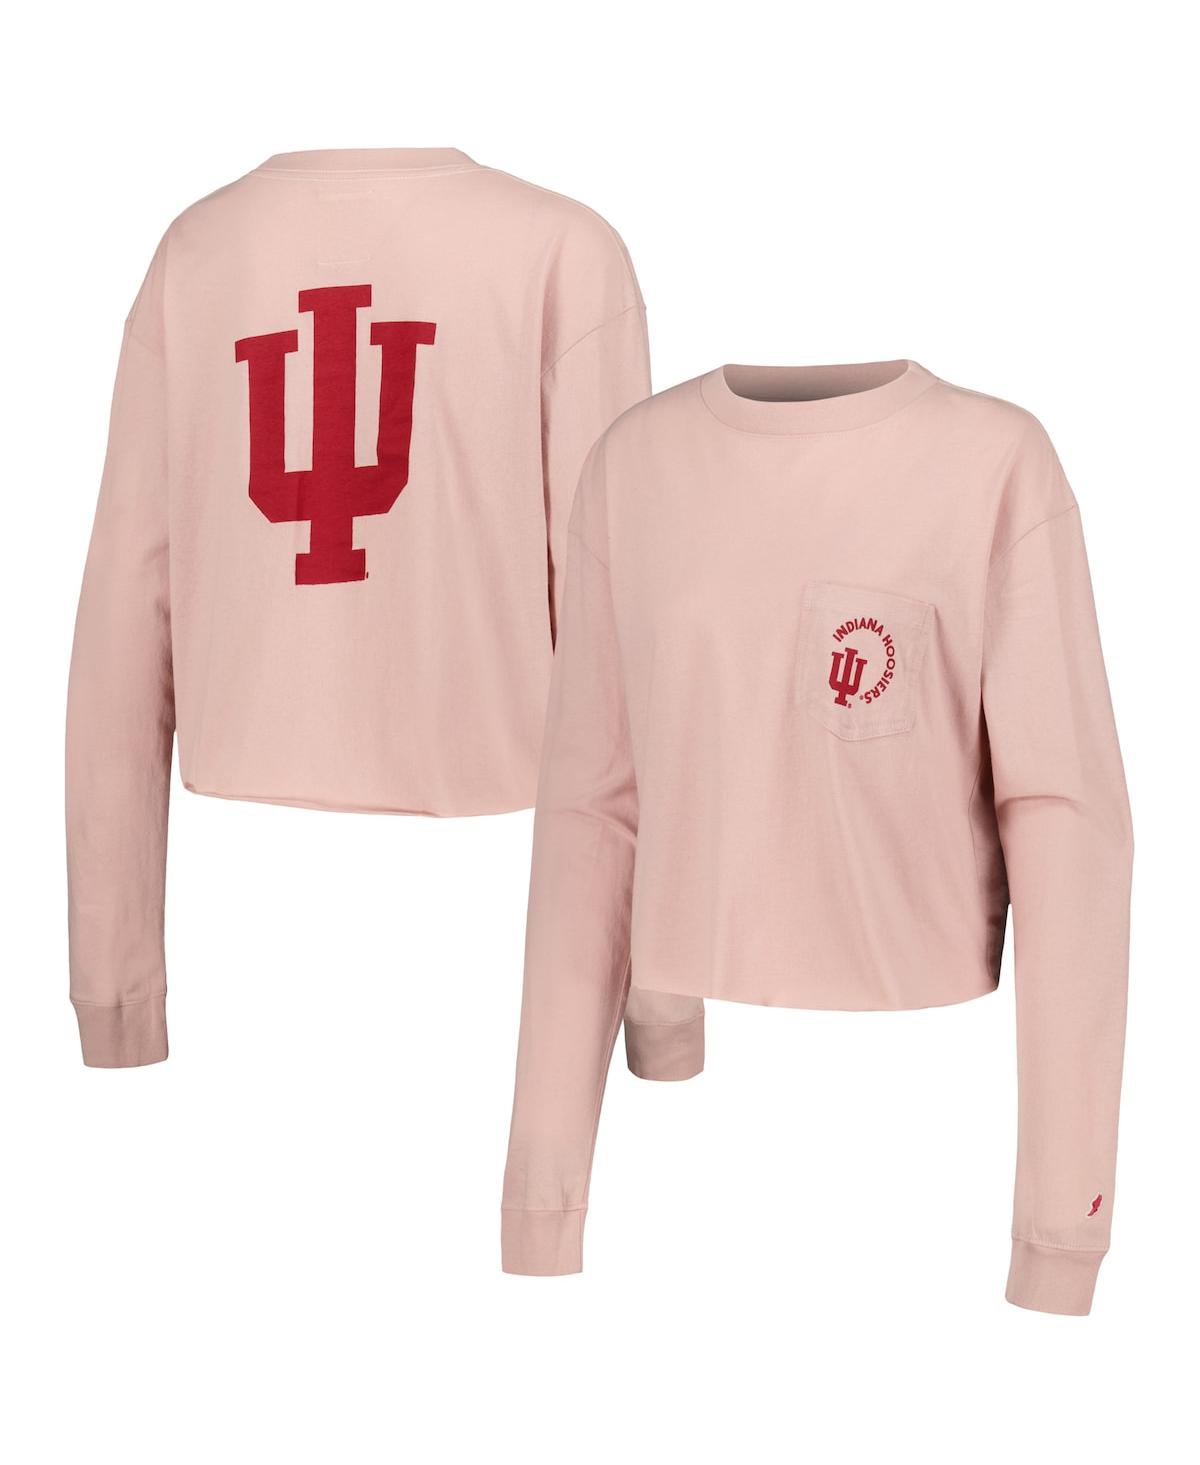 Women's League Collegiate Wear Light Pink Distressed Indiana Hoosiers Clothesline Midi Long Sleeve Cropped T-shirt - Light Pink